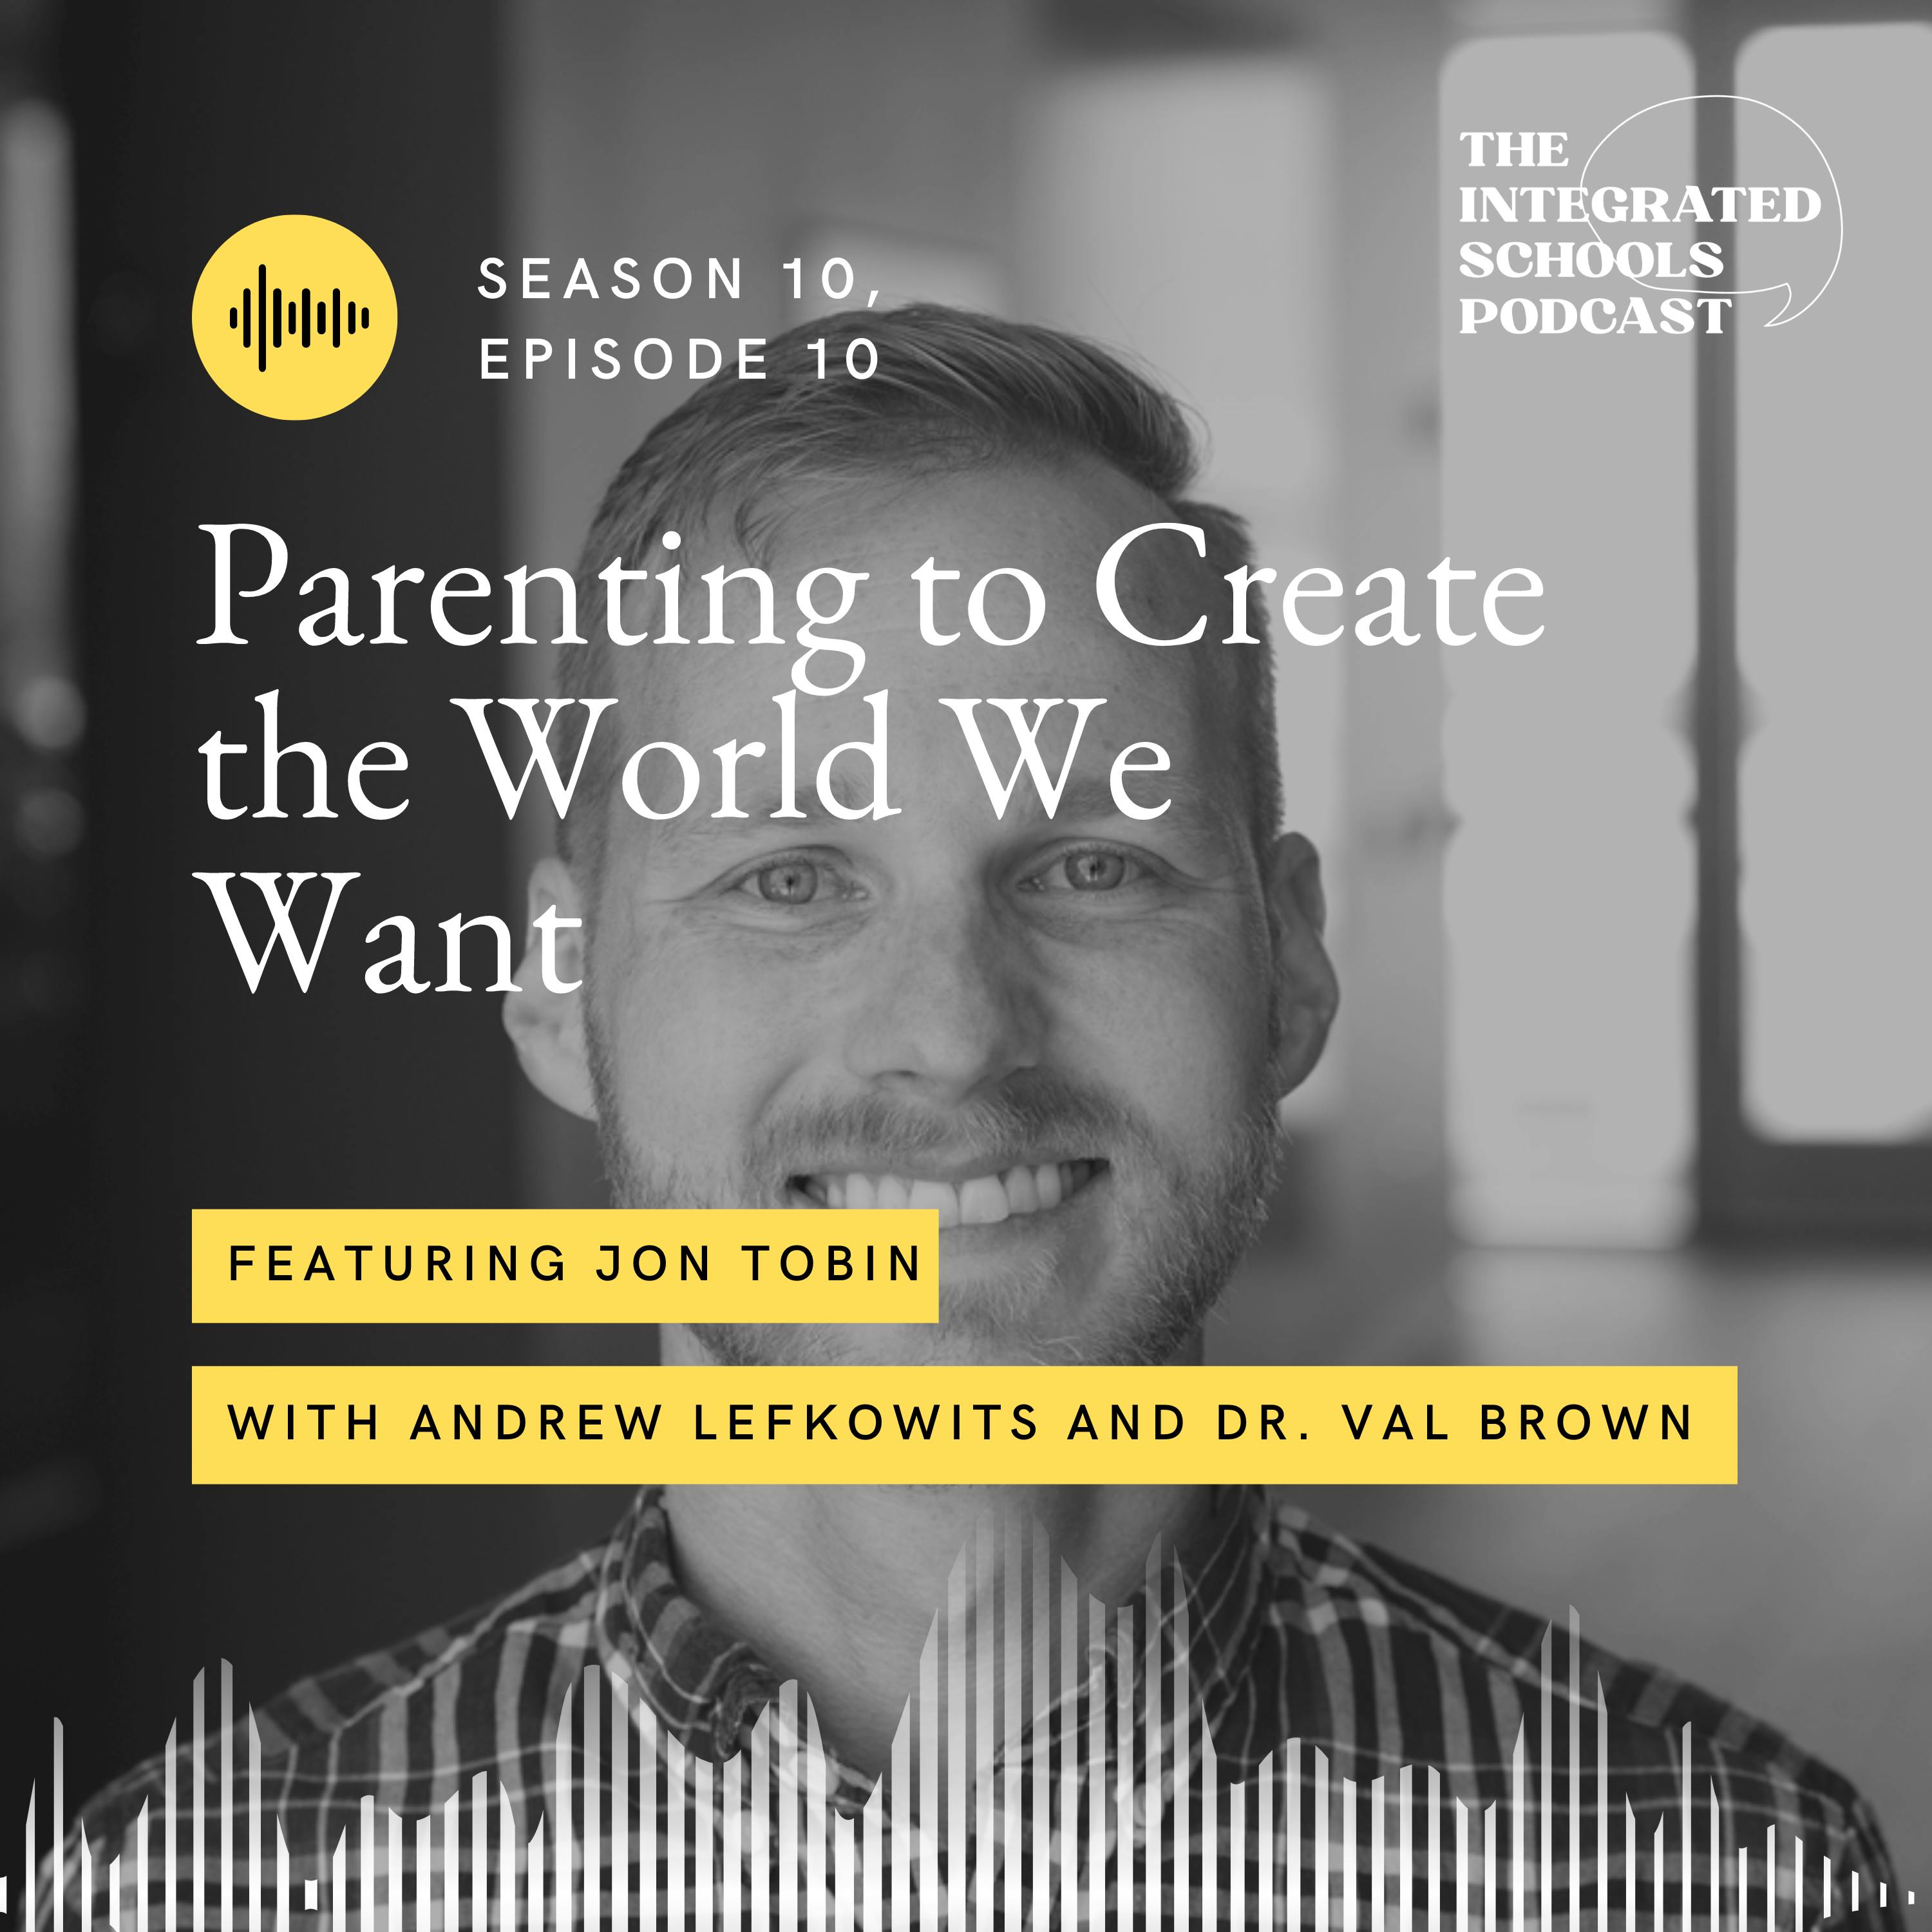 Parenting to Create the World We Want